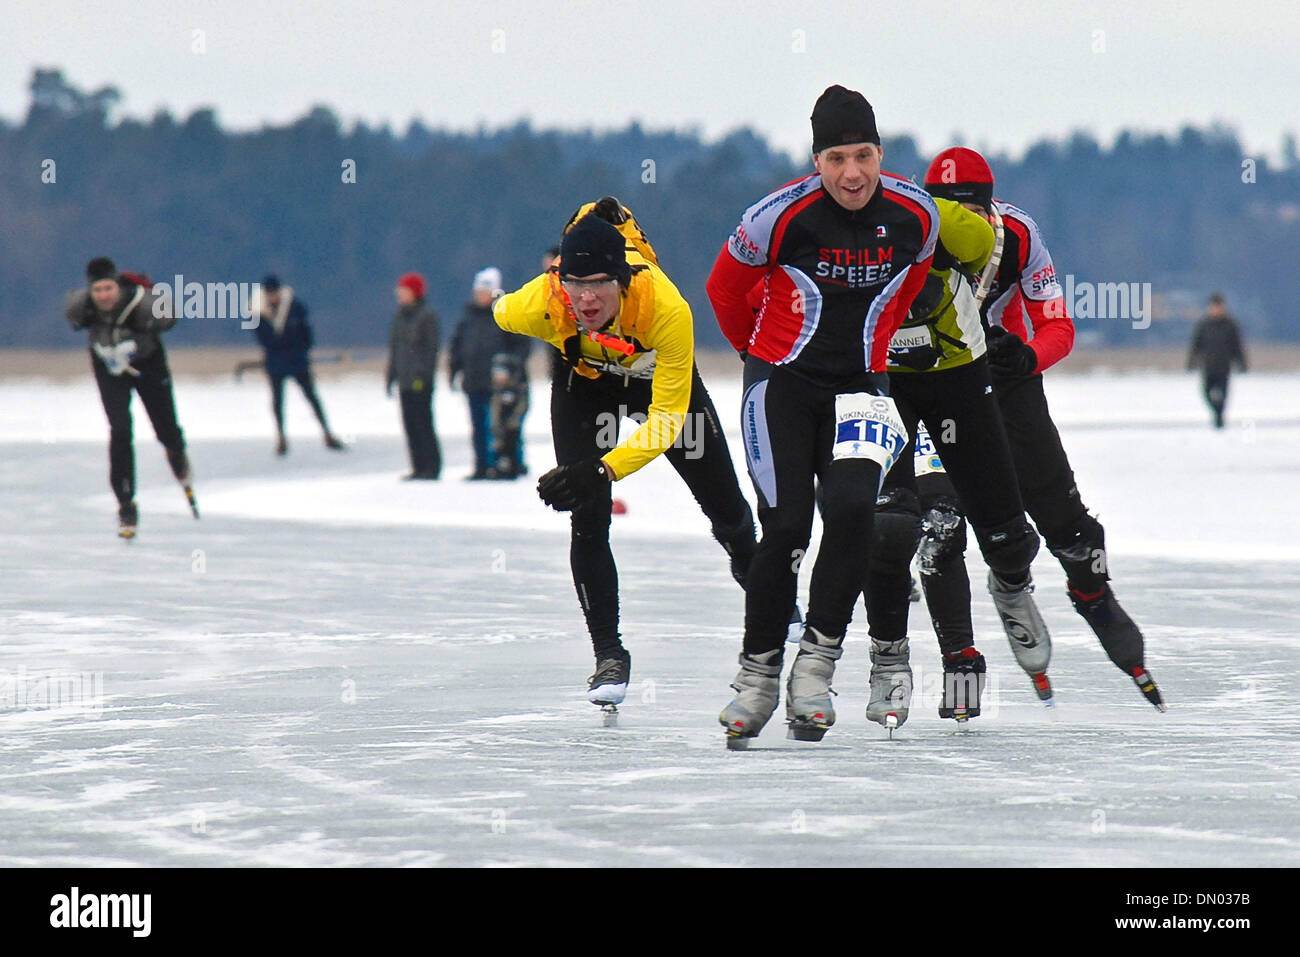 Feb 15, 2009 - Stockholm, Sweden - Vikingarannet 2009 is an ice skating 'marathon' 80 km long and is both a competitive and non-competitive race. Time keeping is individual. The course is planned according to the weather forecast. Normally the start is in Skarholmen, Uppsala, to Sigtuna, Kungsangen and finish in Hasselby. Vkingaturen is a shorter race, 50 km long, Vikingarannet kor Stock Photo